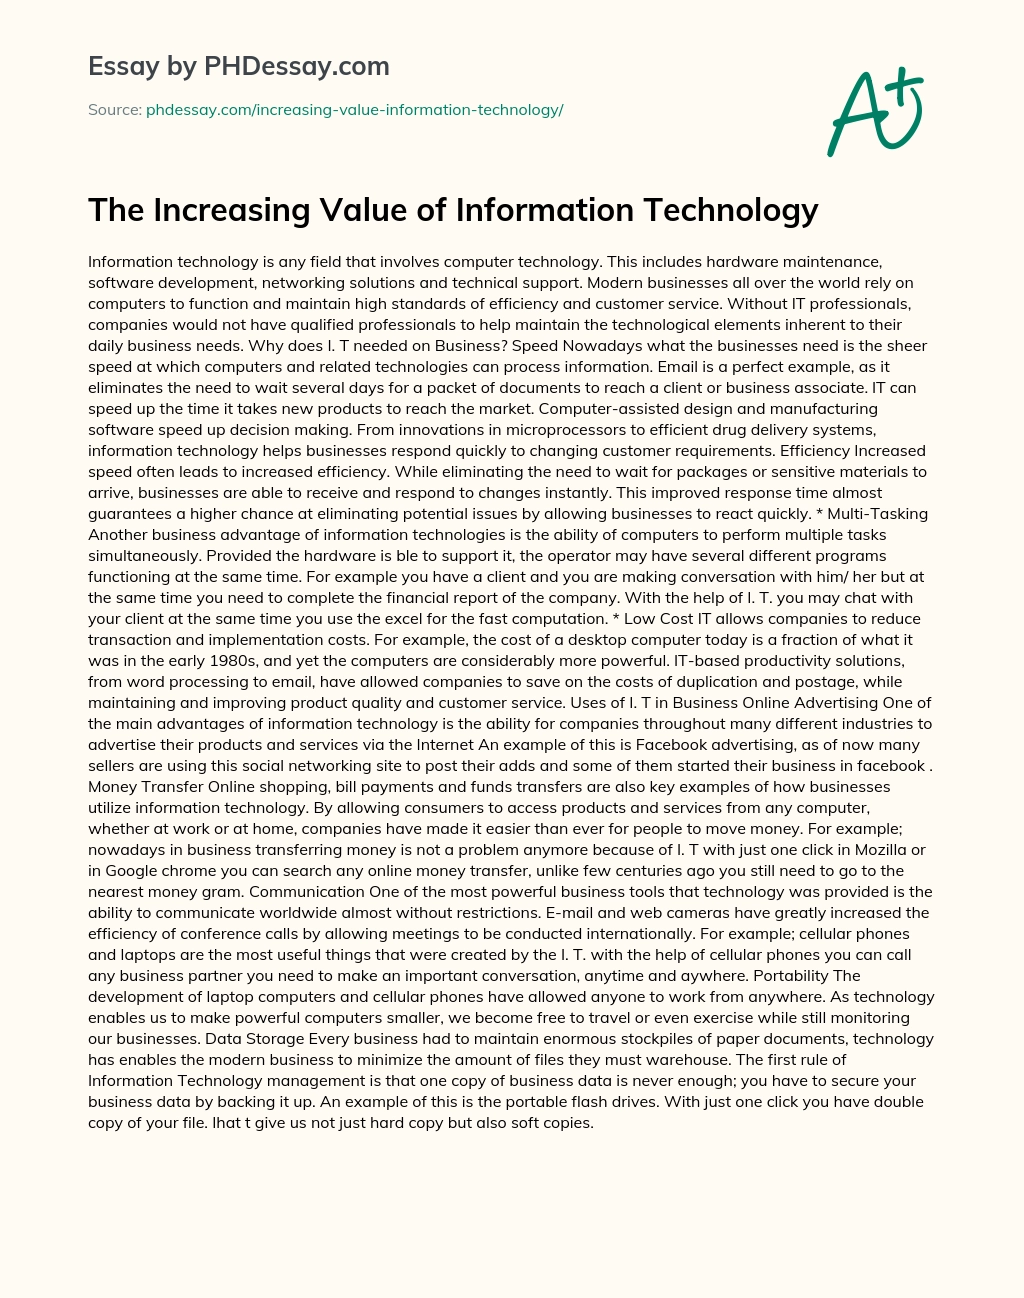 The Increasing Value of Information Technology essay